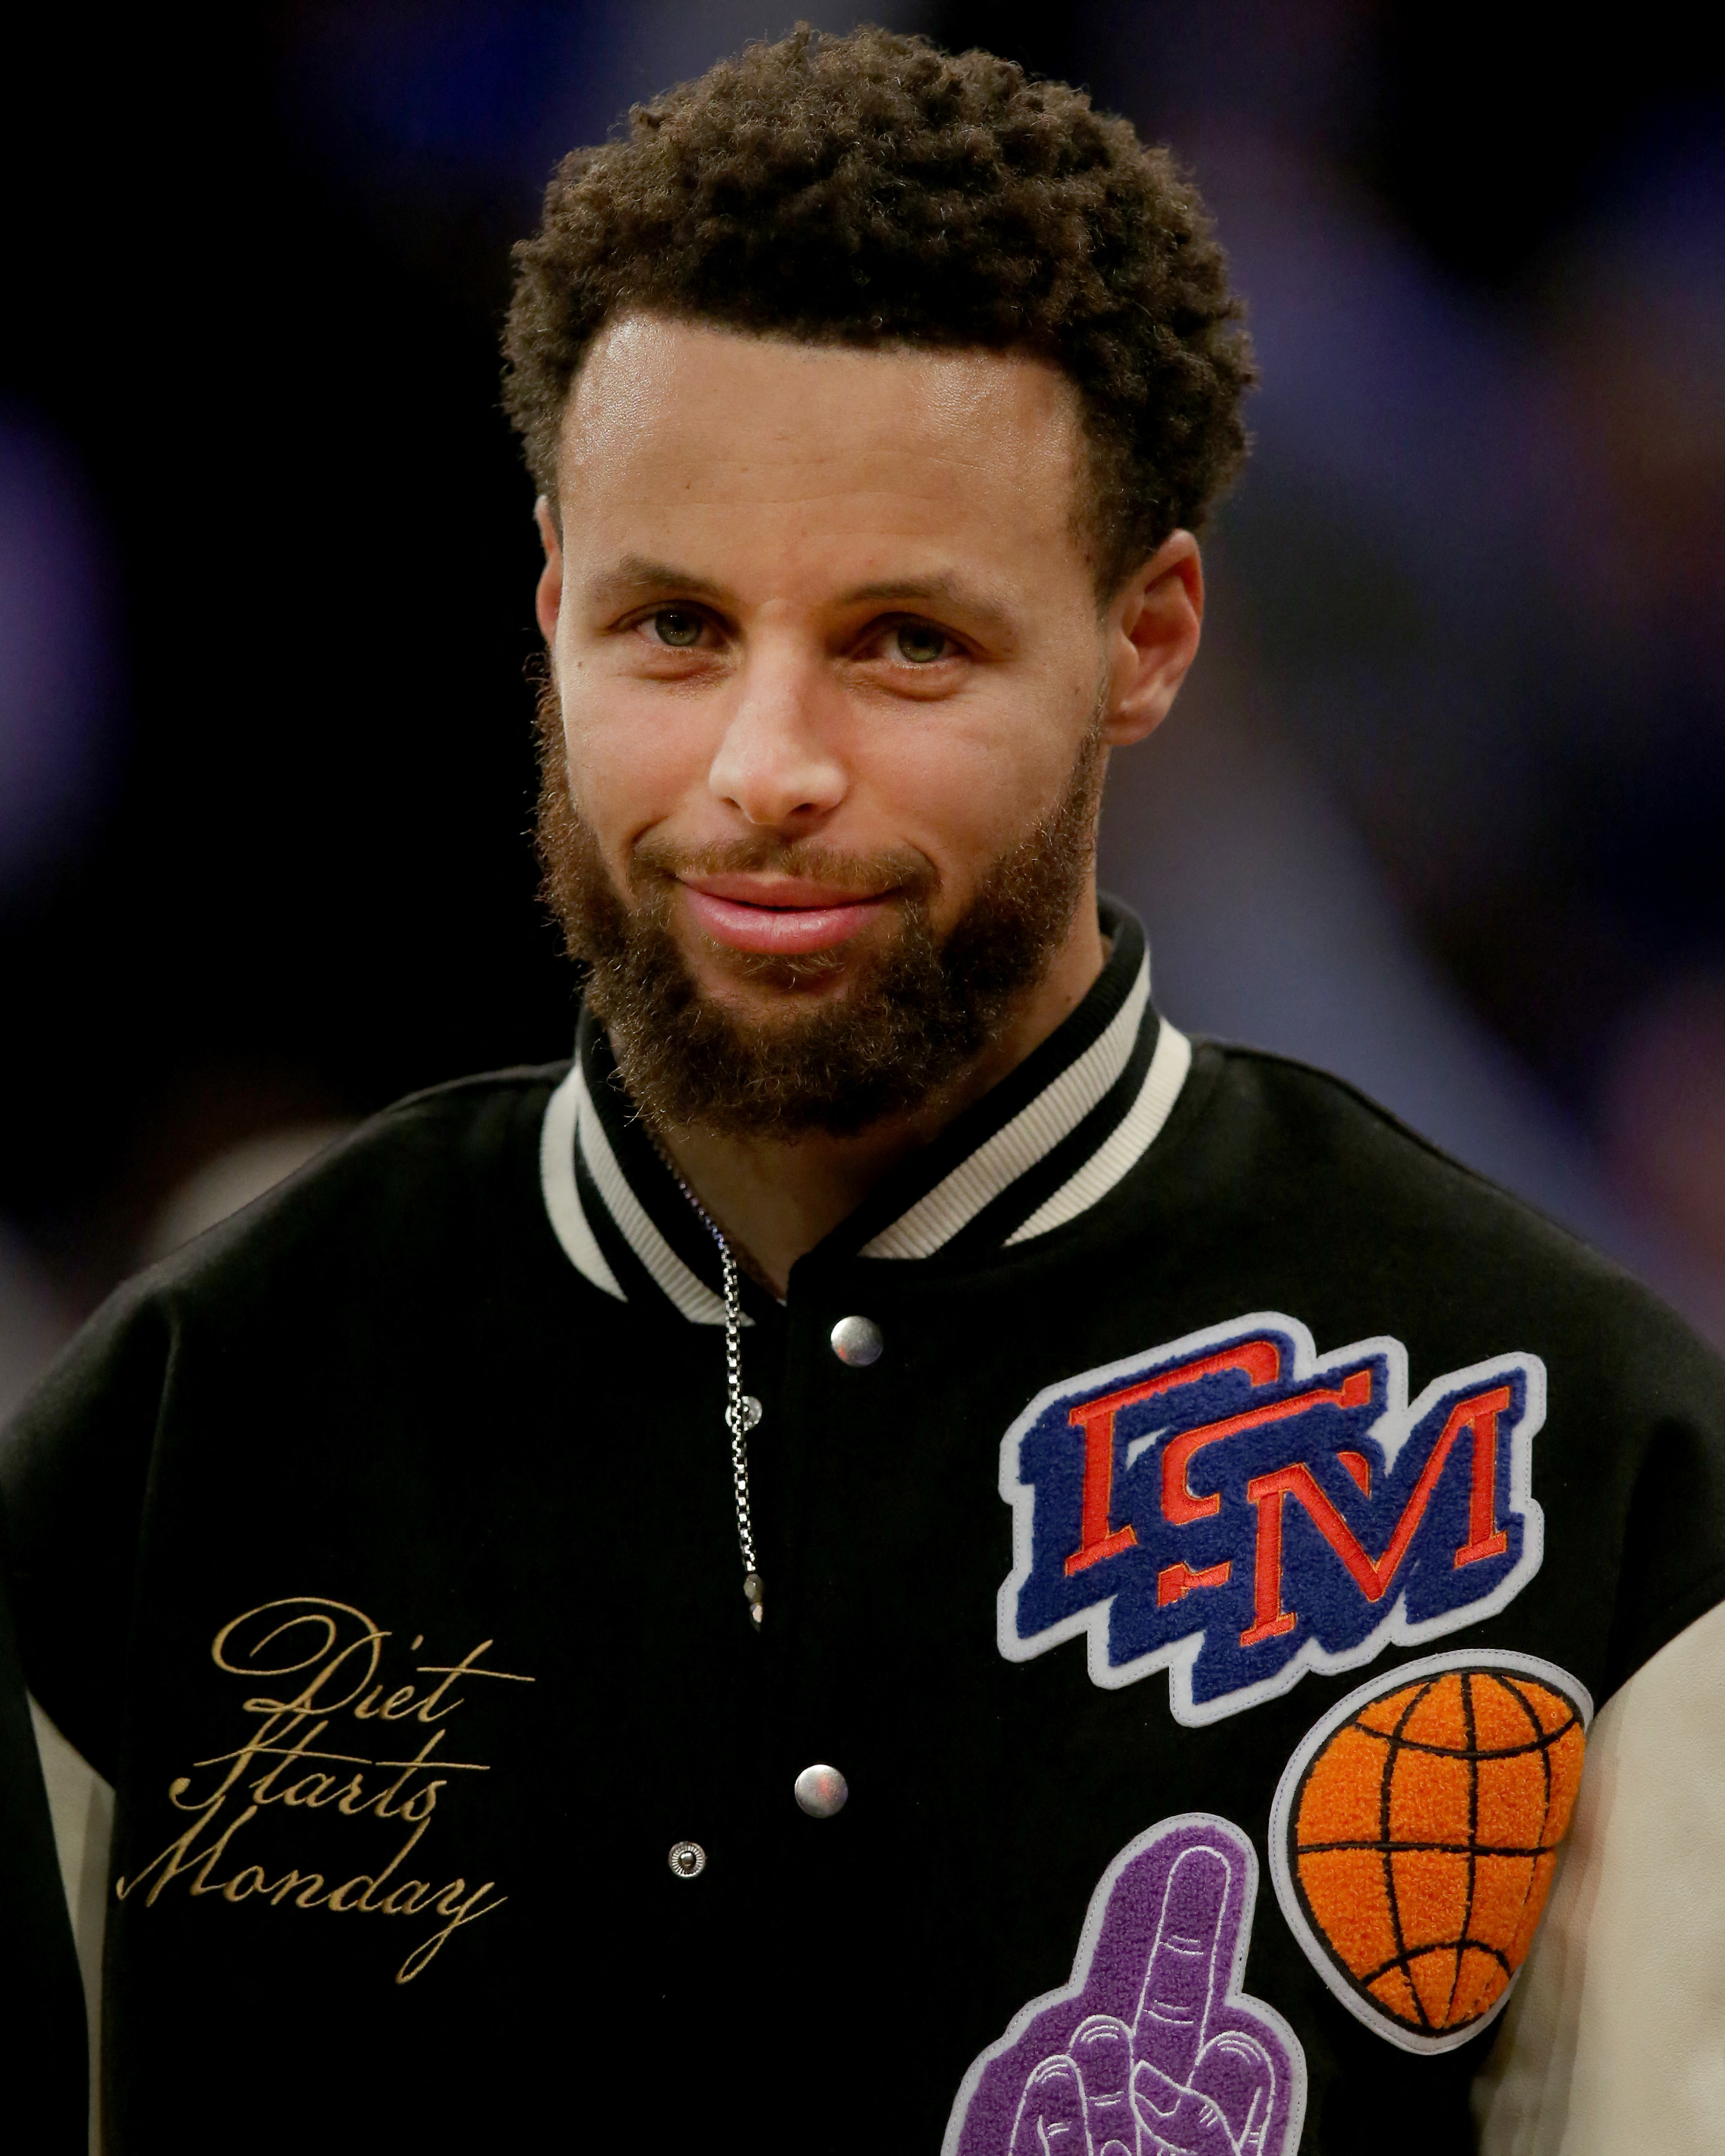 Curry is an eight-time NBA All-Star